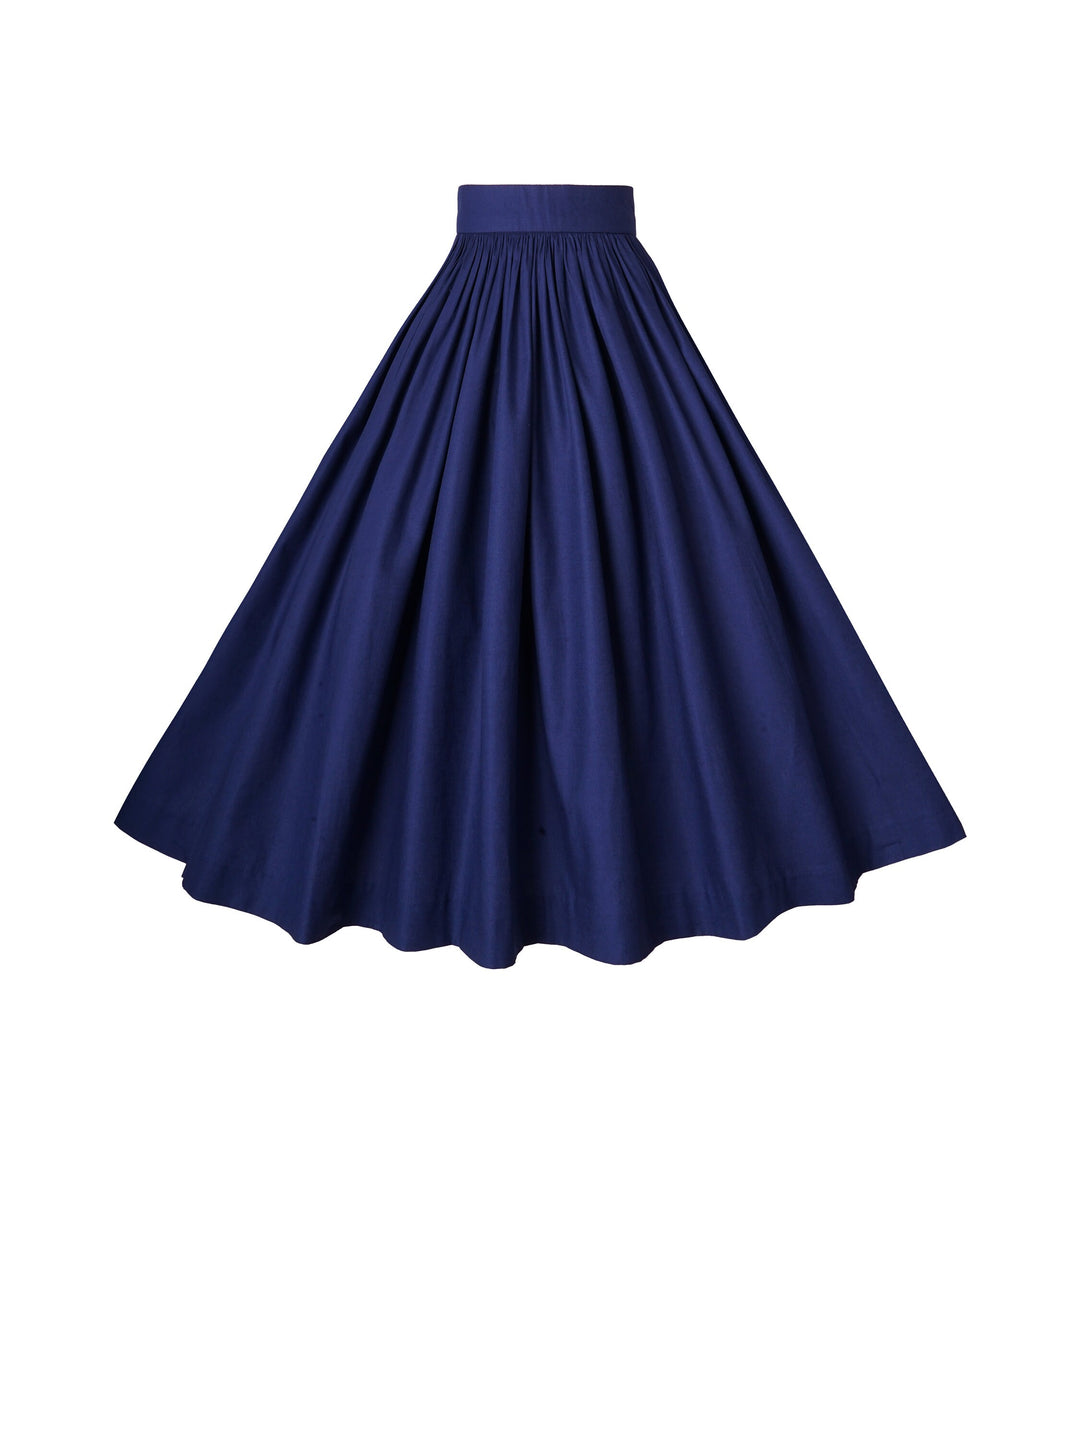 RTS - Size S - Lola Skirt in Navy Blue Cotton